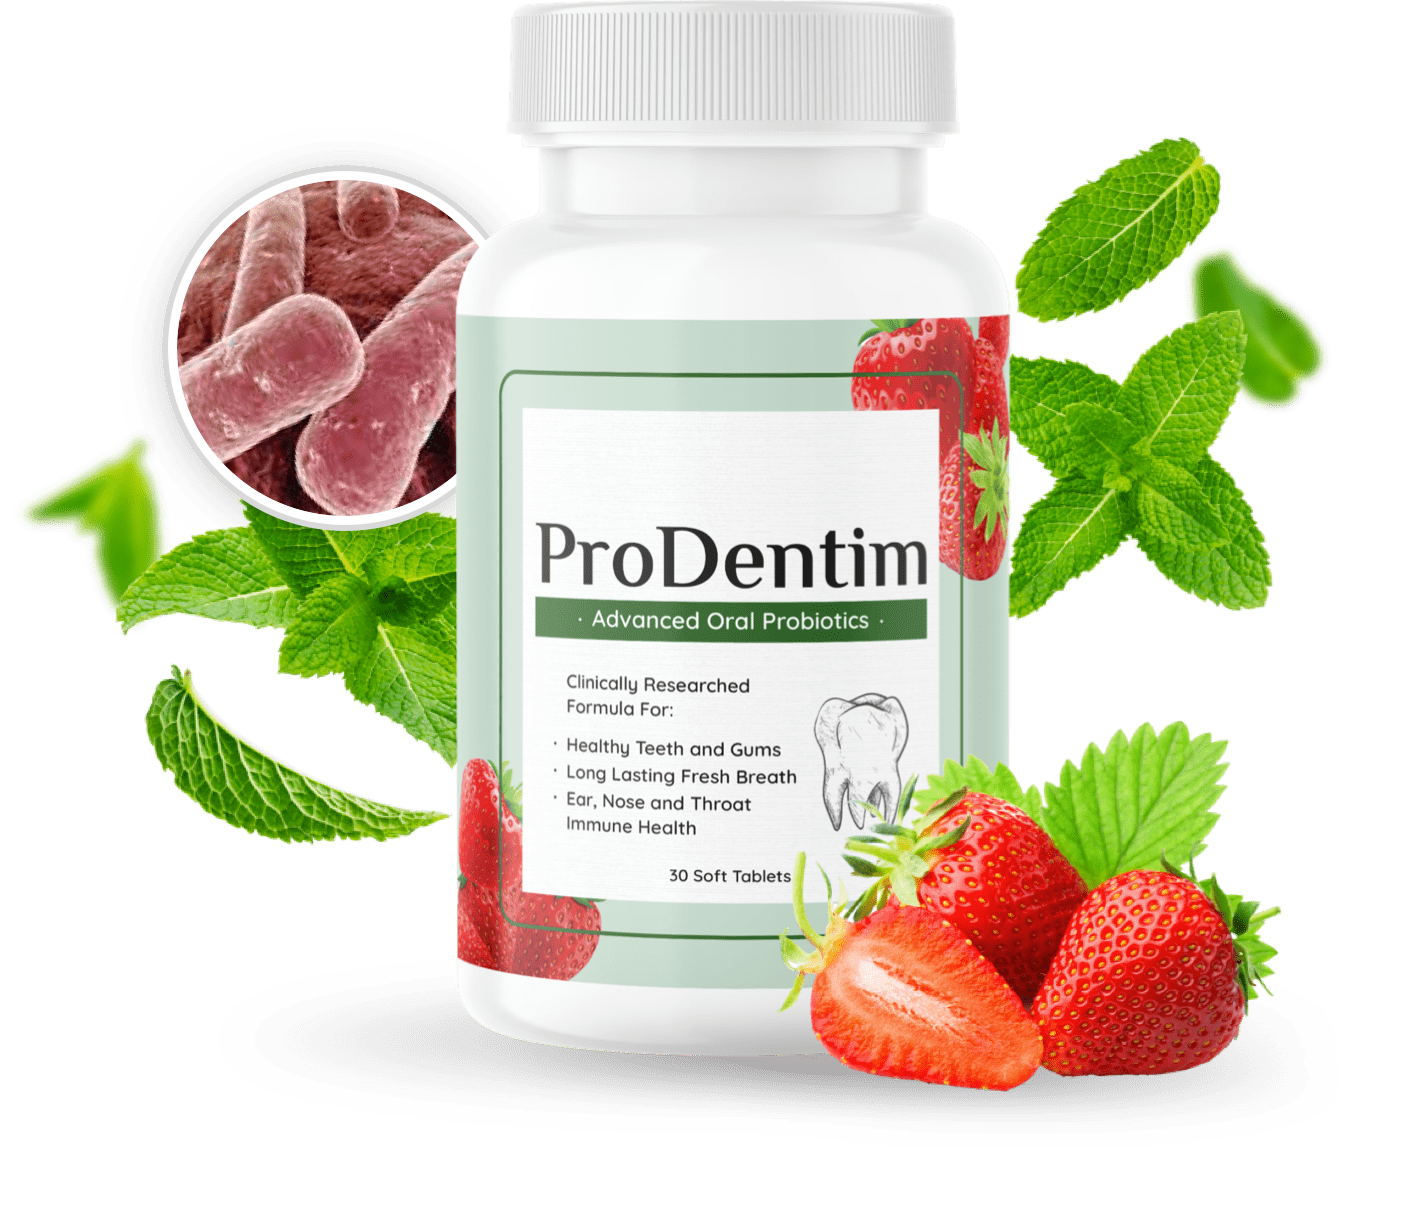 Image of a bottle of ProDentim oral probiotics surrounded by strawberries and mint leaves